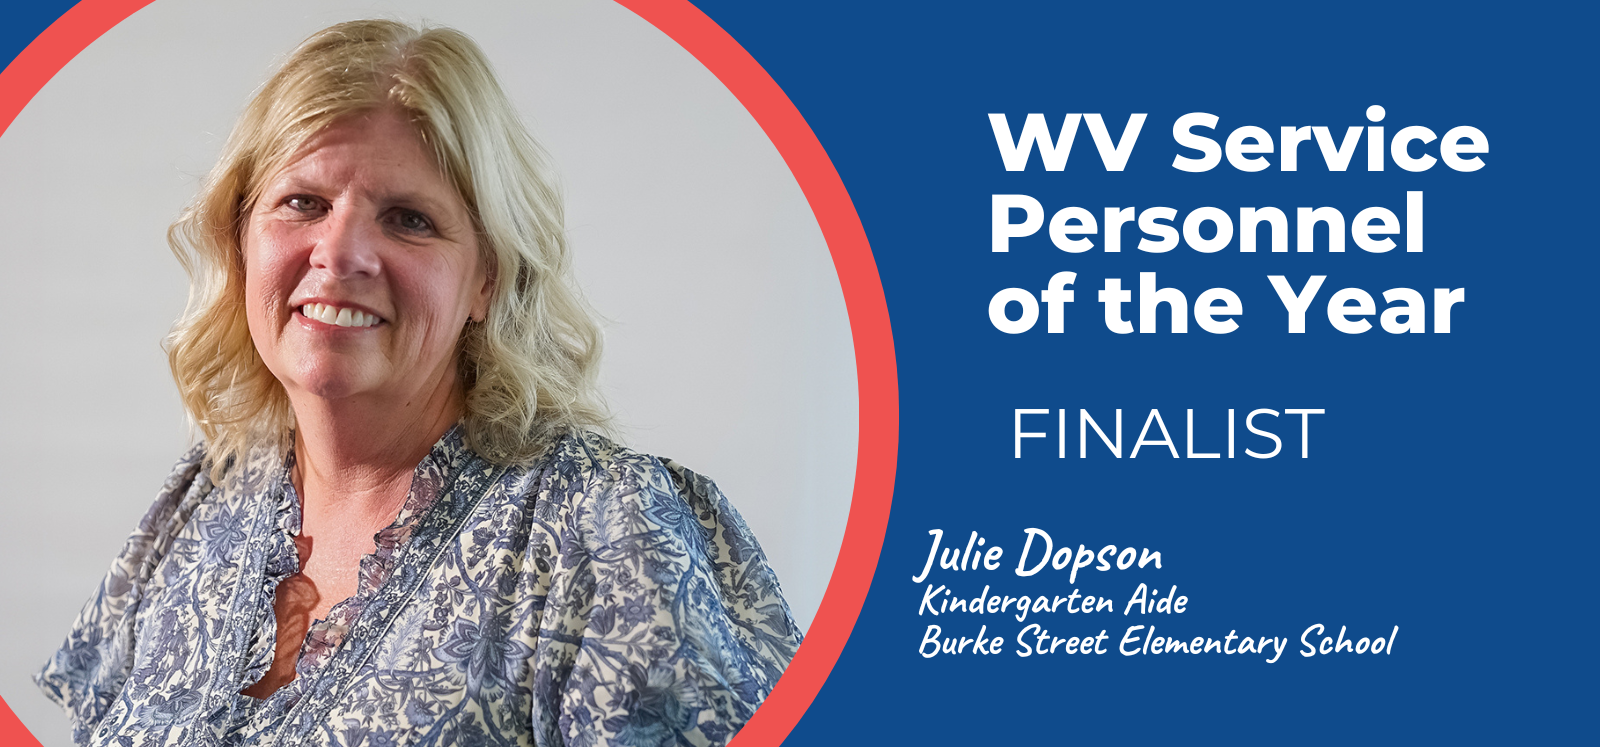 image of wv service personnel of the year template with image featuring julie dopson